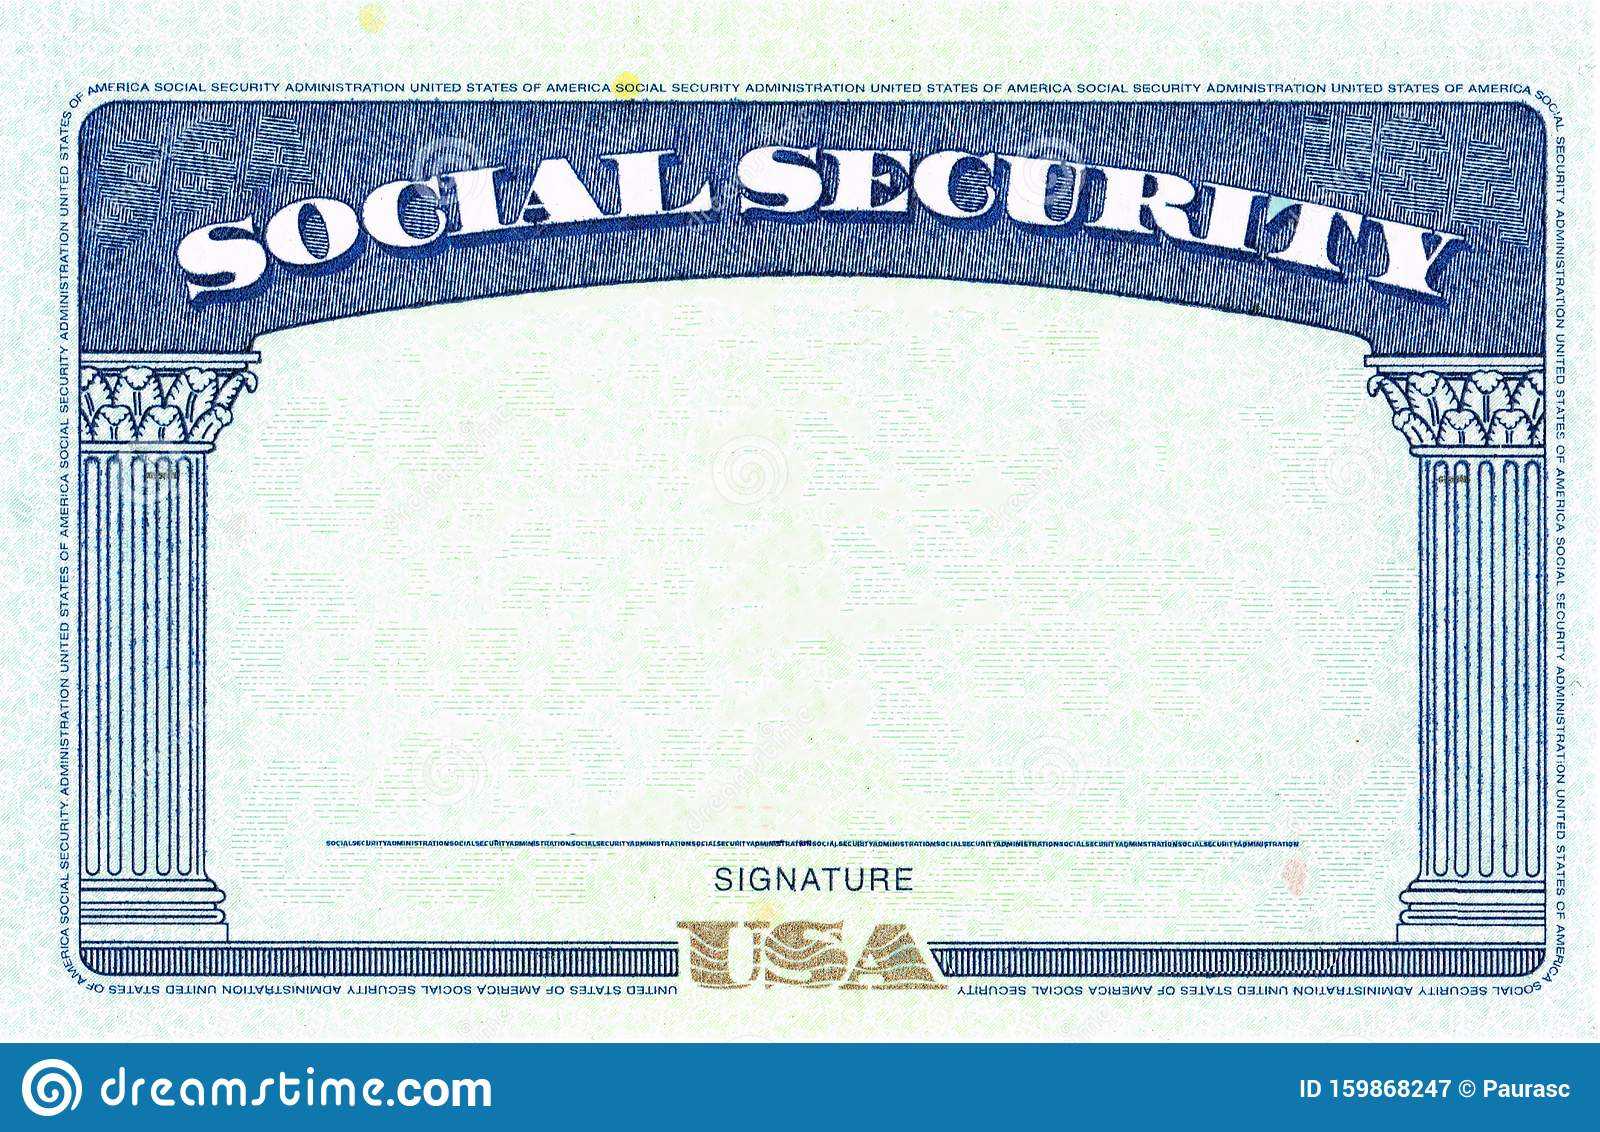 Social Security Card Blank Stock Image. Image Of Emigration Regarding Blank Social Security Card Template Download